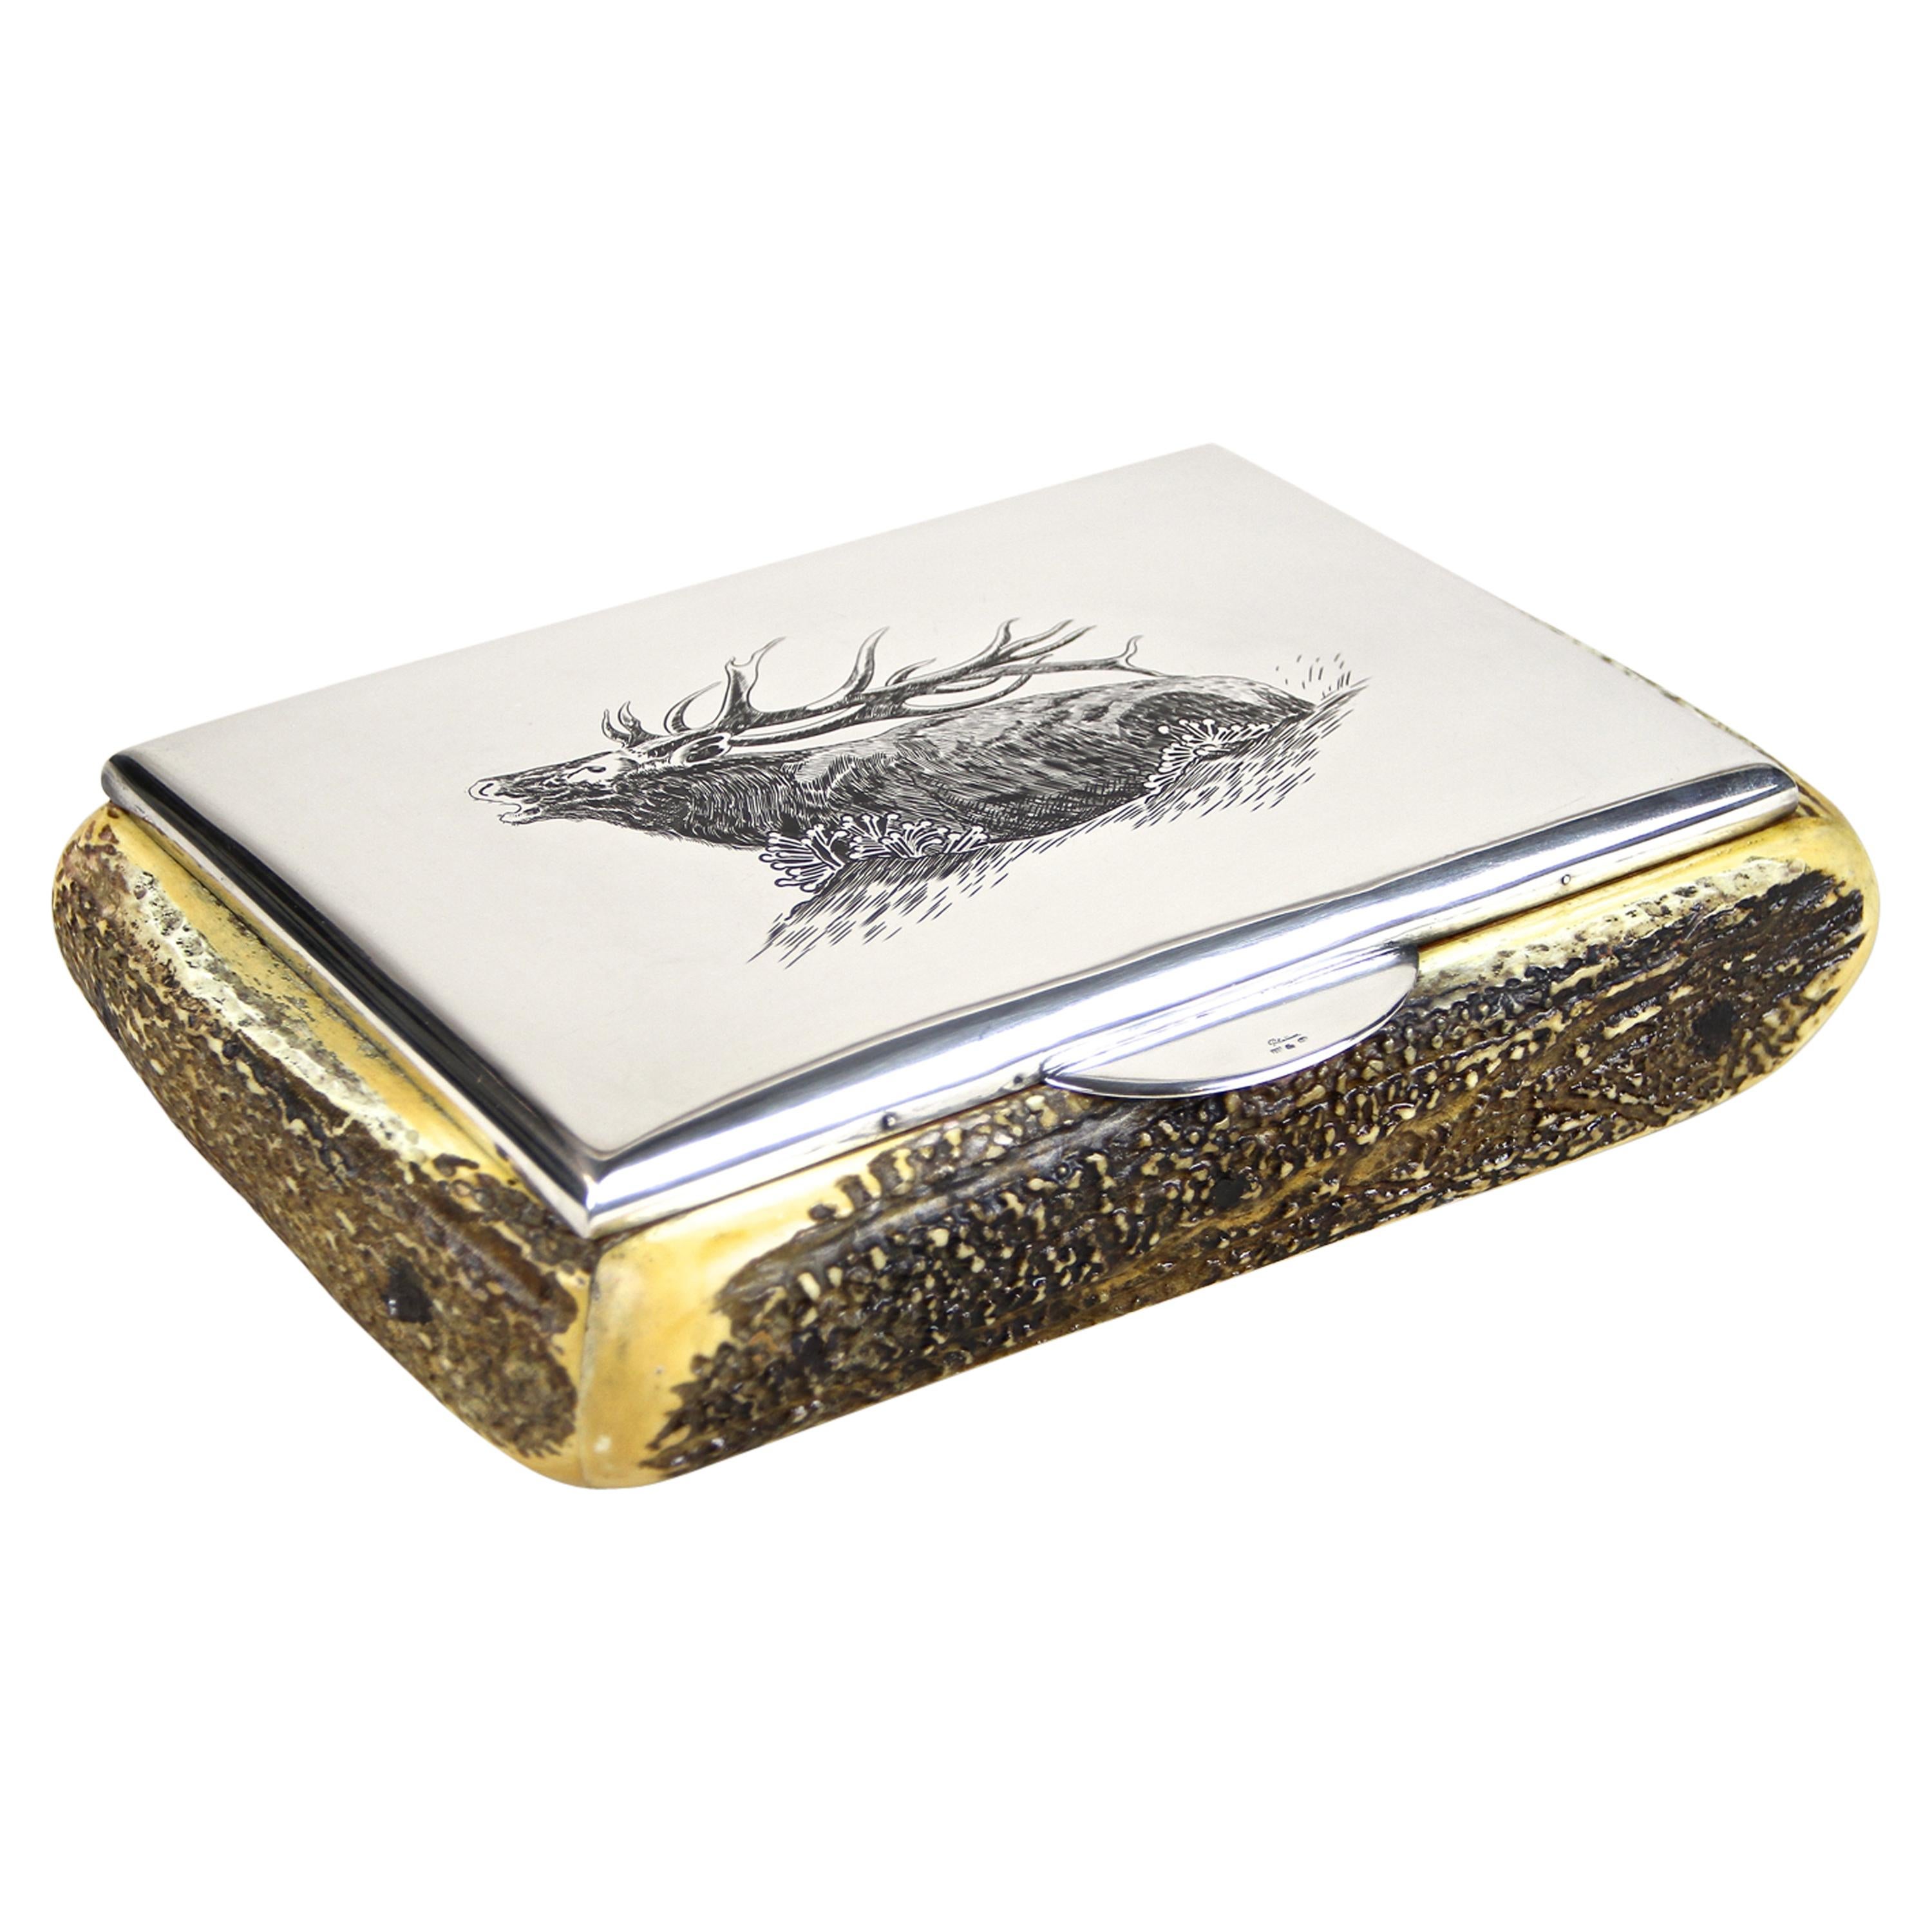 Silver Box with Deer Antler Coverings, 900 Silver Hallmarked, Austria circa 1920